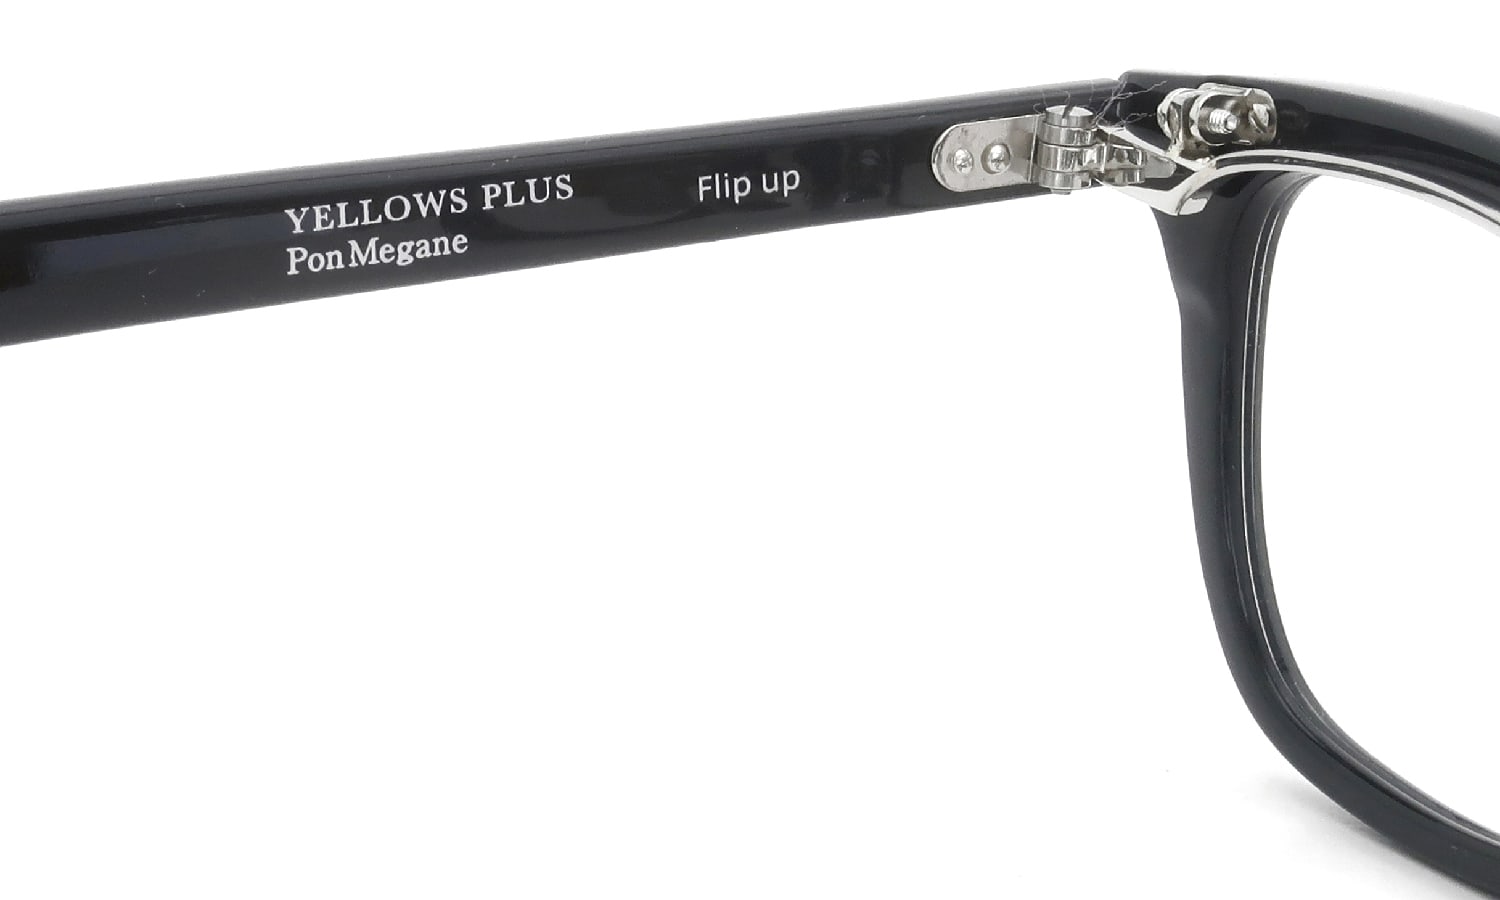 YELLOWS PLUS for PonMegane 跳ね上げ式メガネ Flip up Celluloid Black